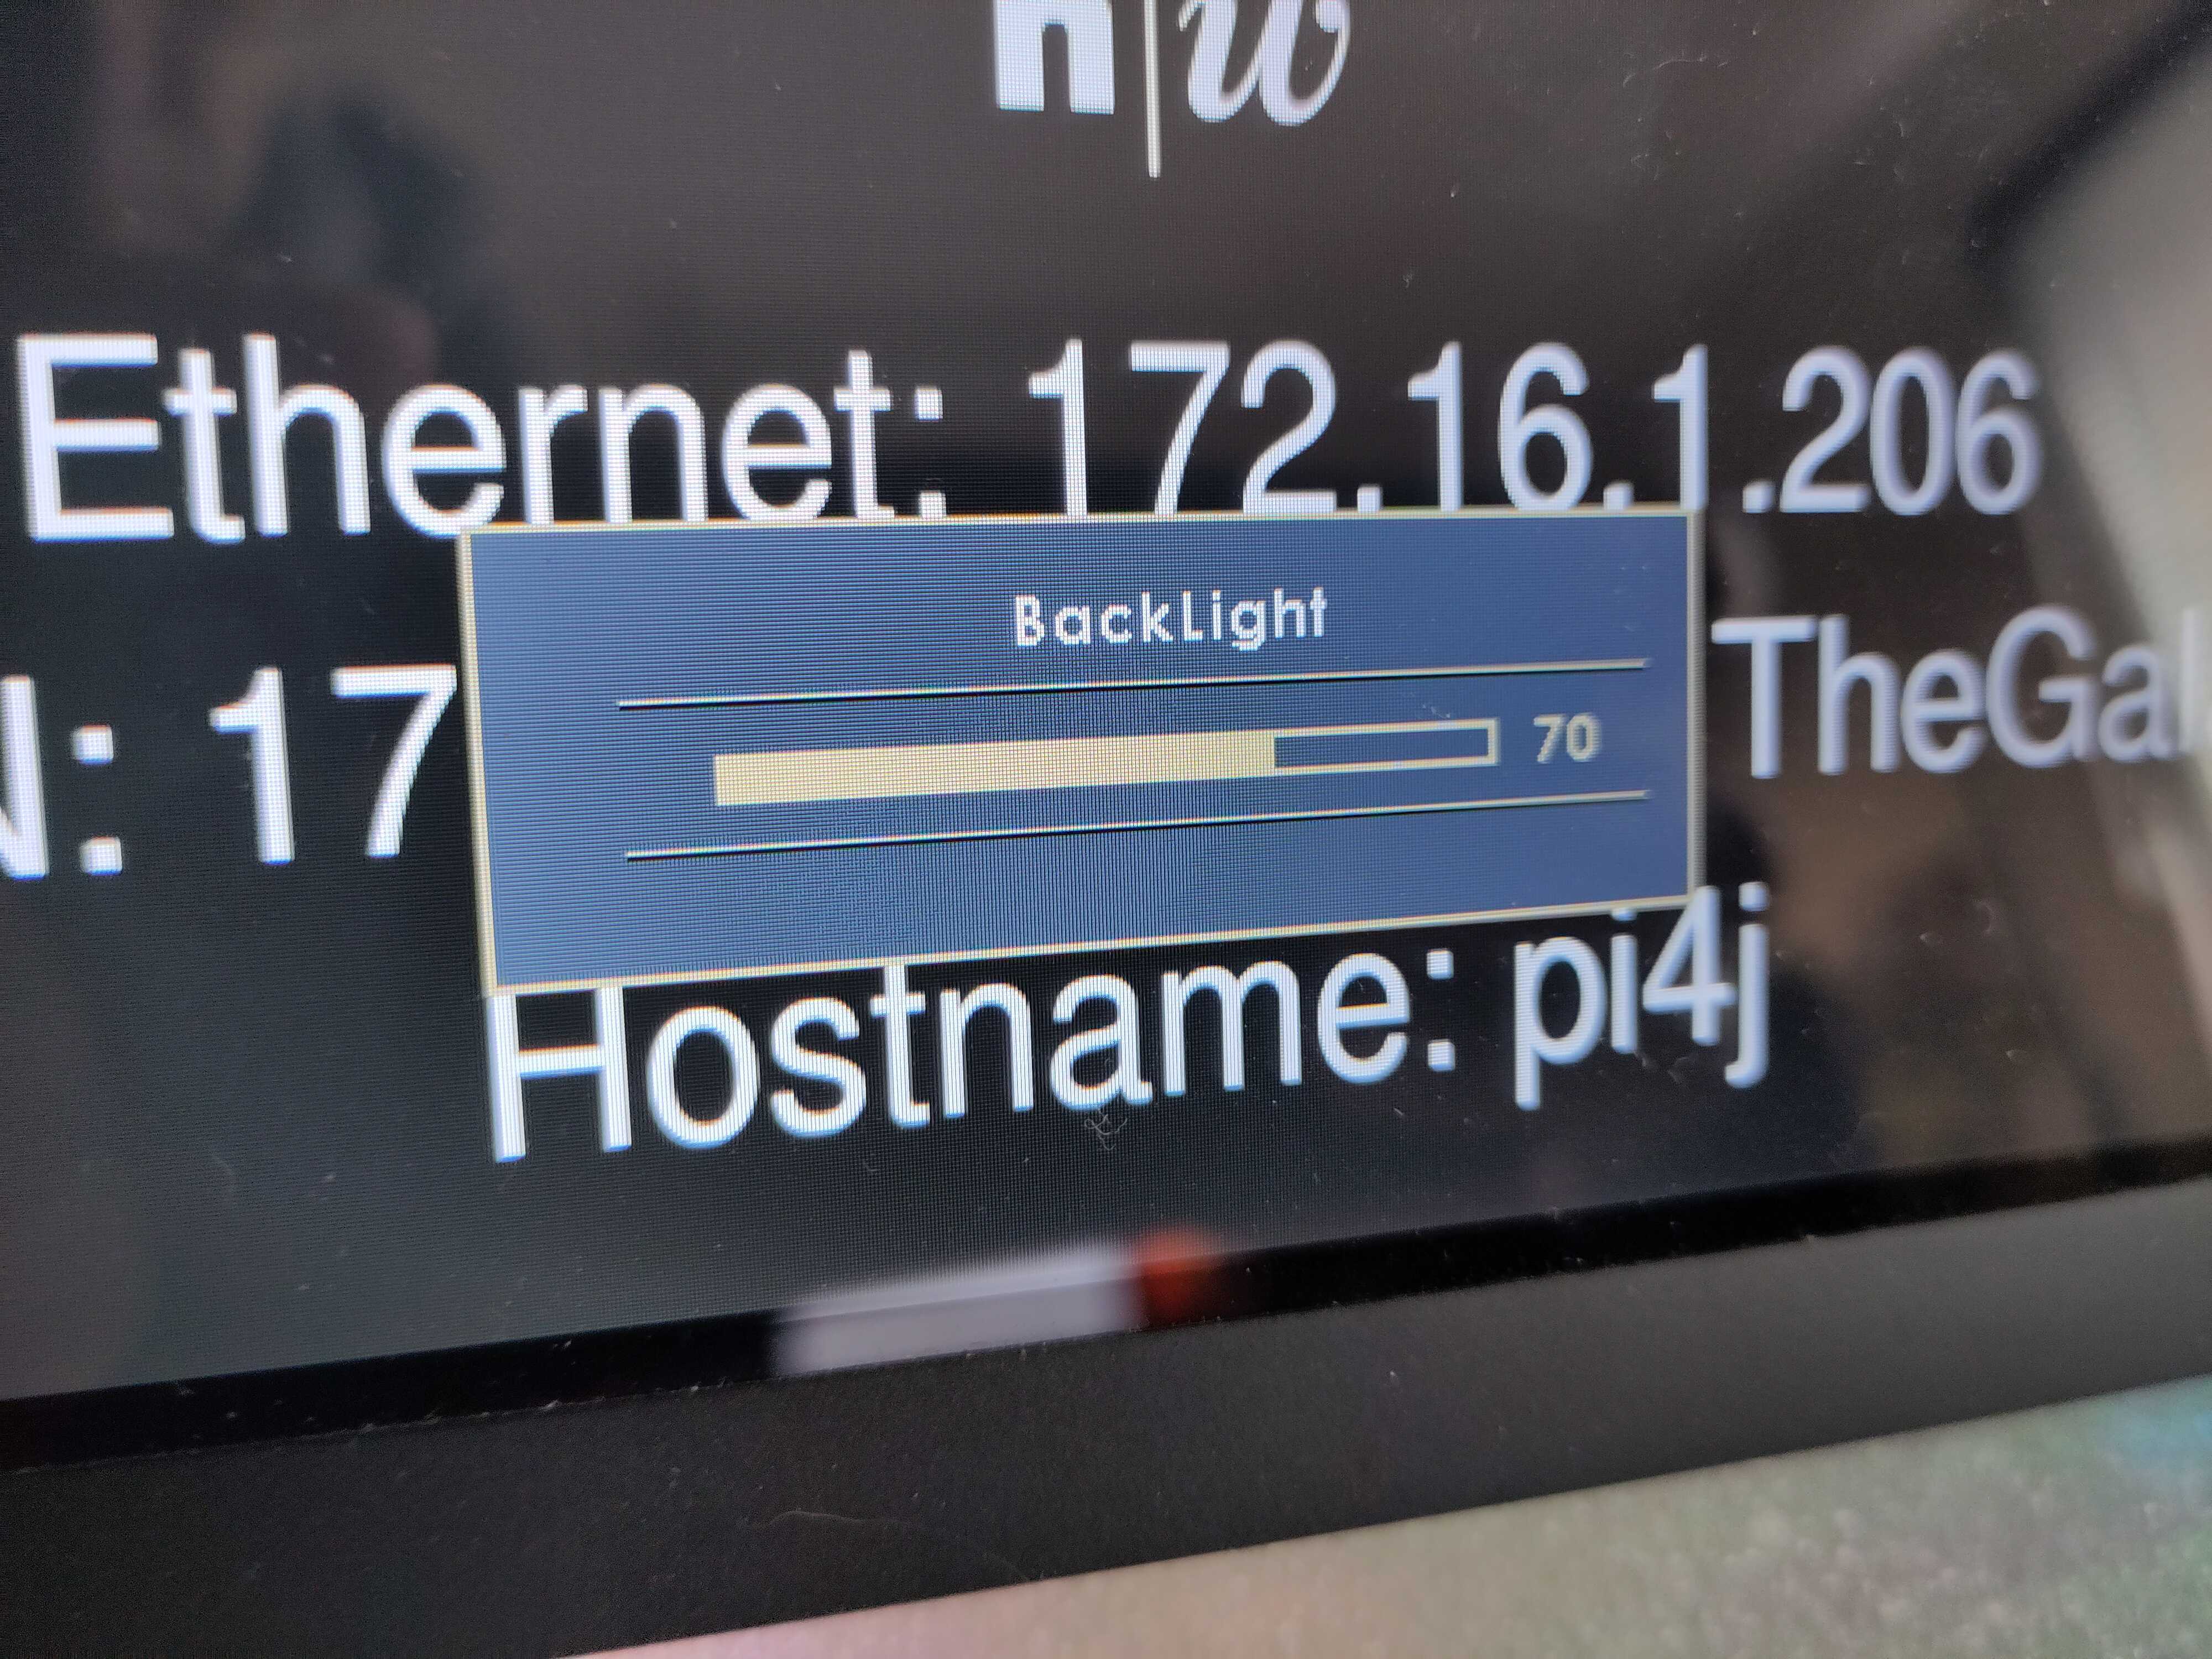 HDMI resolution of 1920x1080 is supported